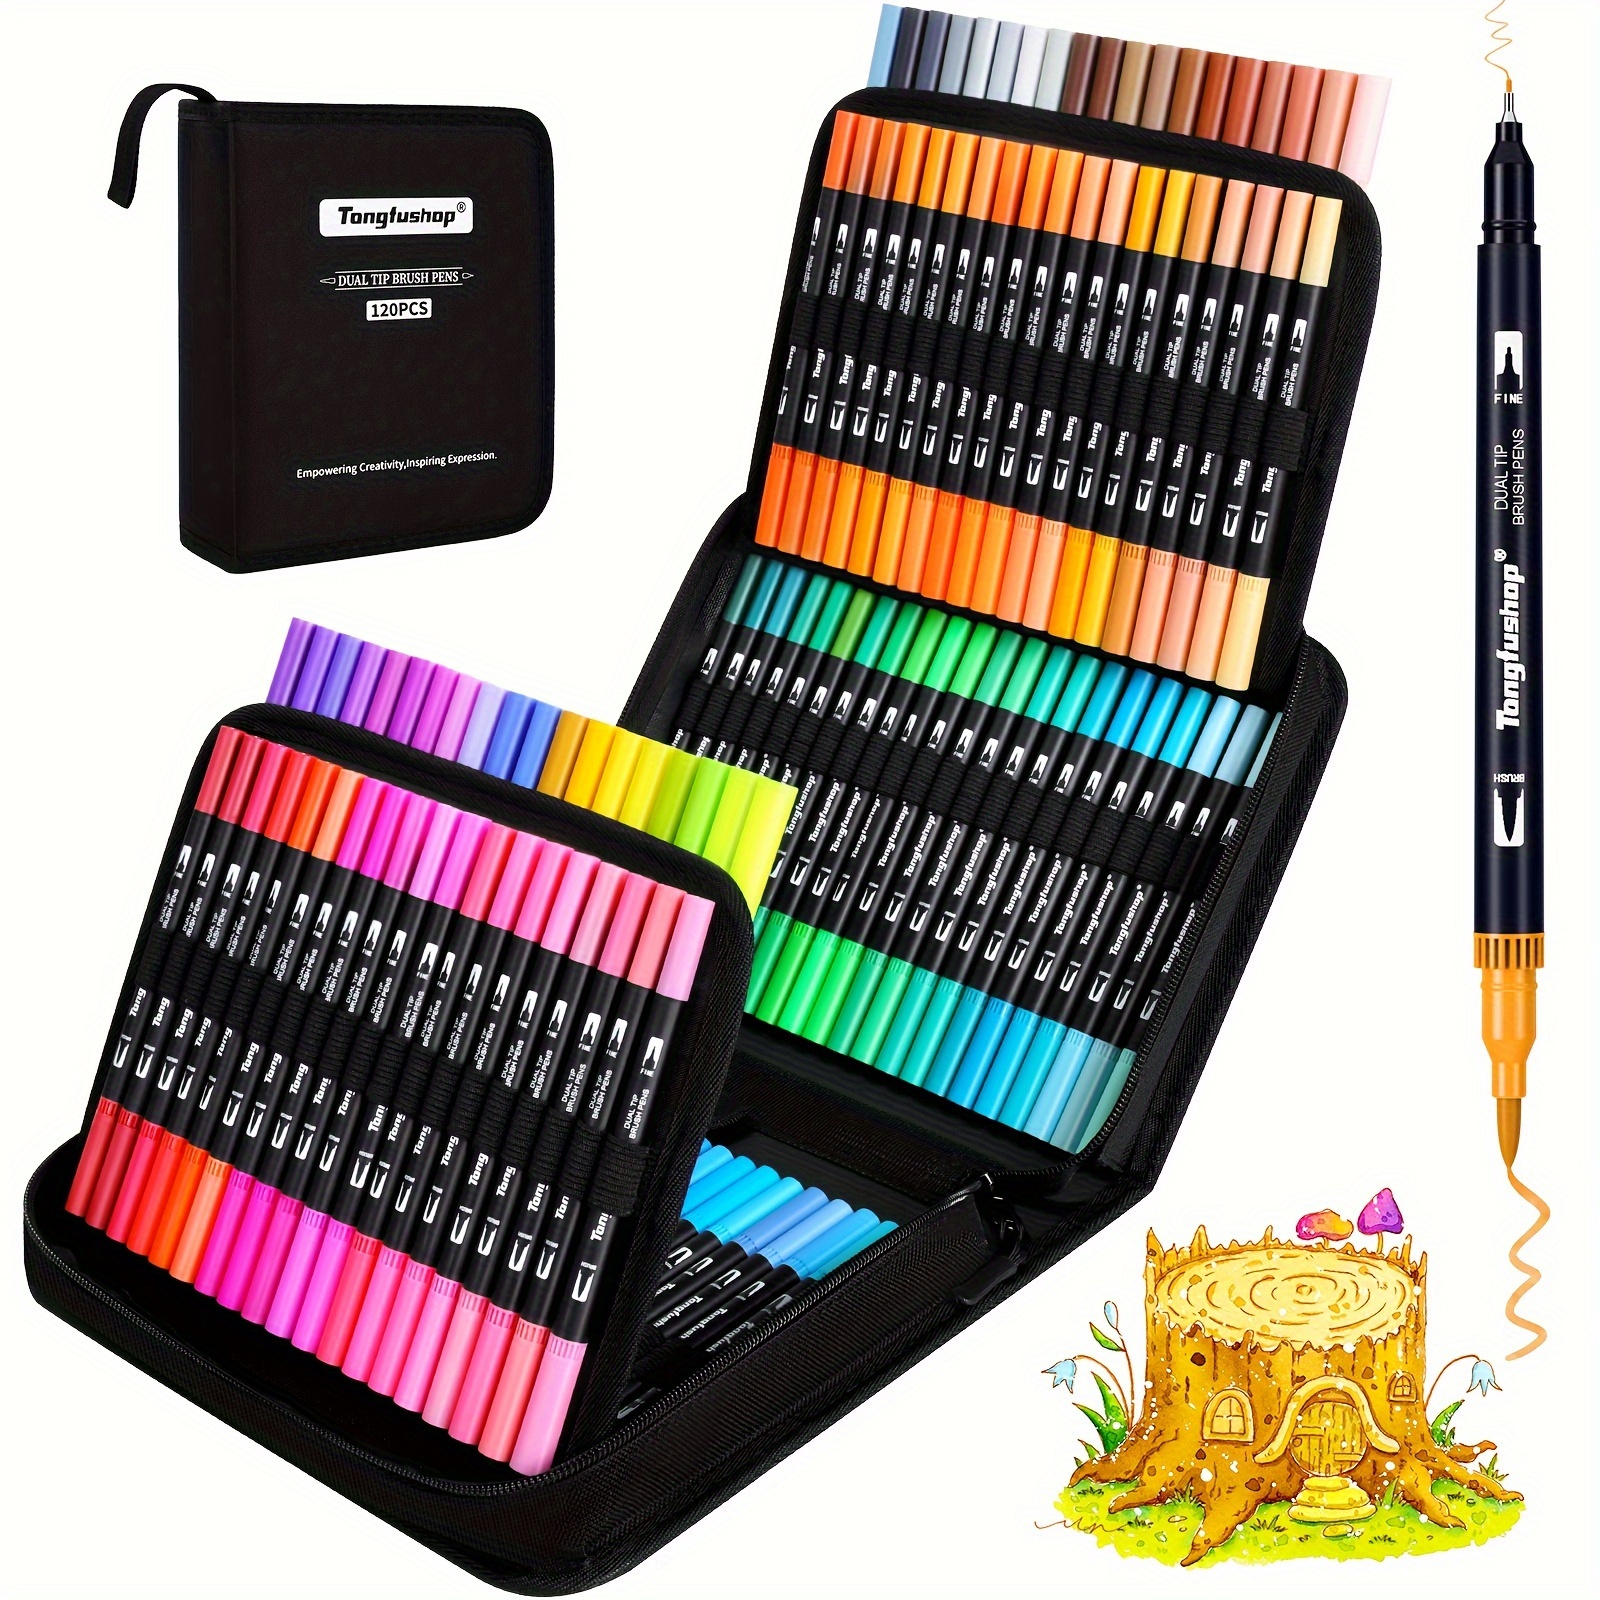 

Tongfushop 60/72/100/120 Colors Dual Tip Brush Markers, Brush And Fineliner Coloring Brush Pens Set, Art Pen For Beginner Coloring Books, Christmas Cards Drawing, Lettering, Calligraphy, Journaling